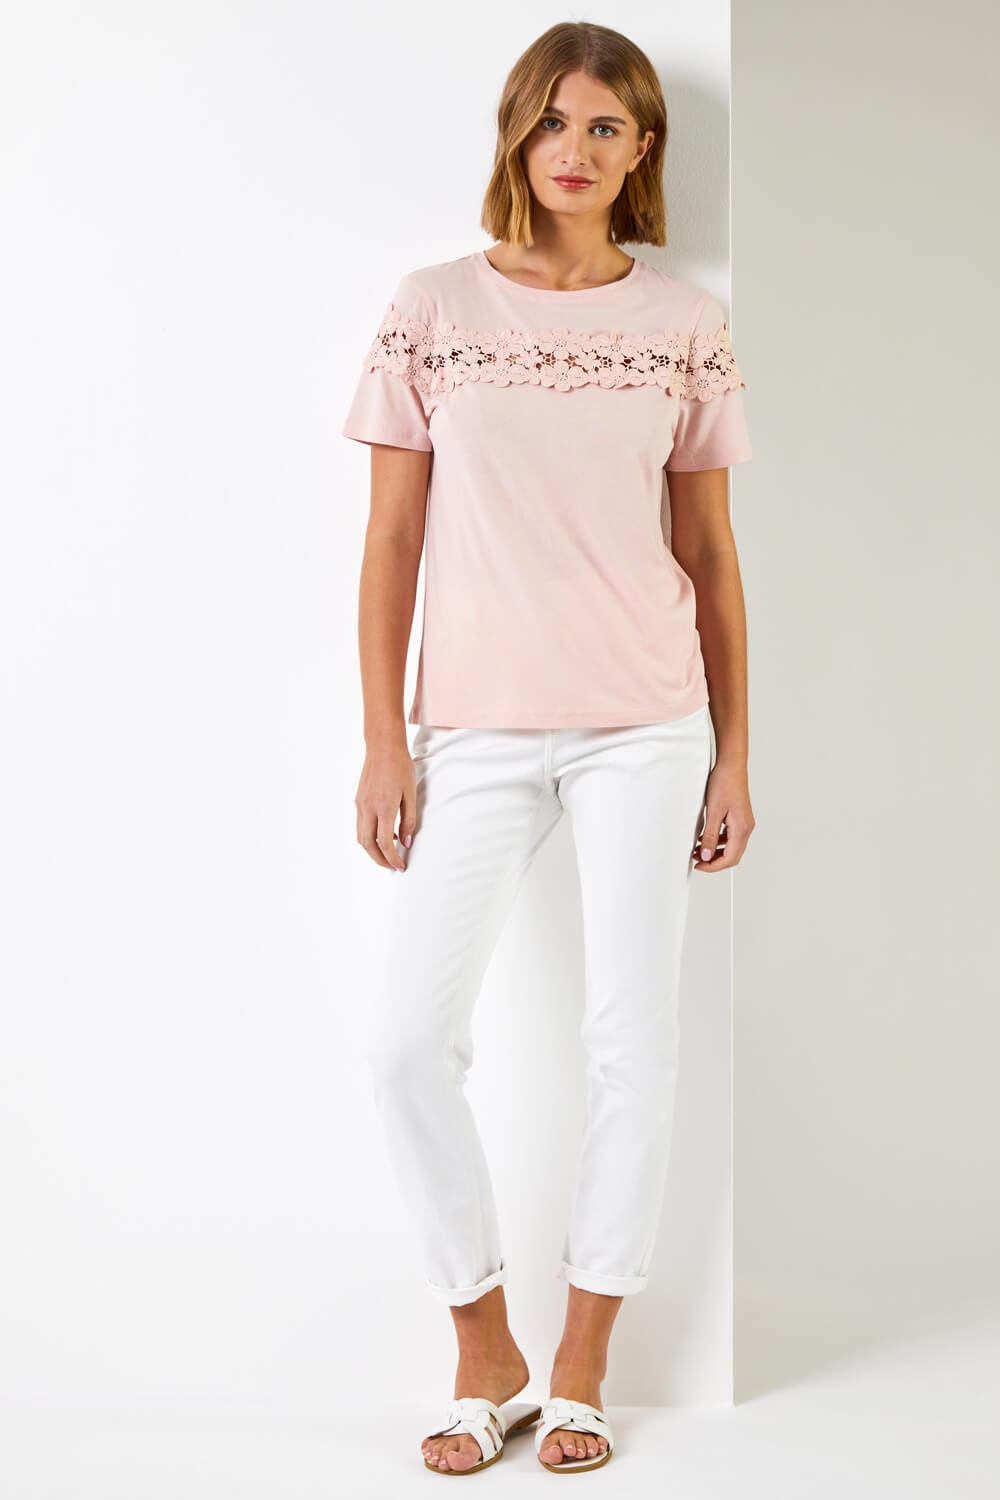 Light Pink Lace Detail Jersey T-Shirt, Image 3 of 4